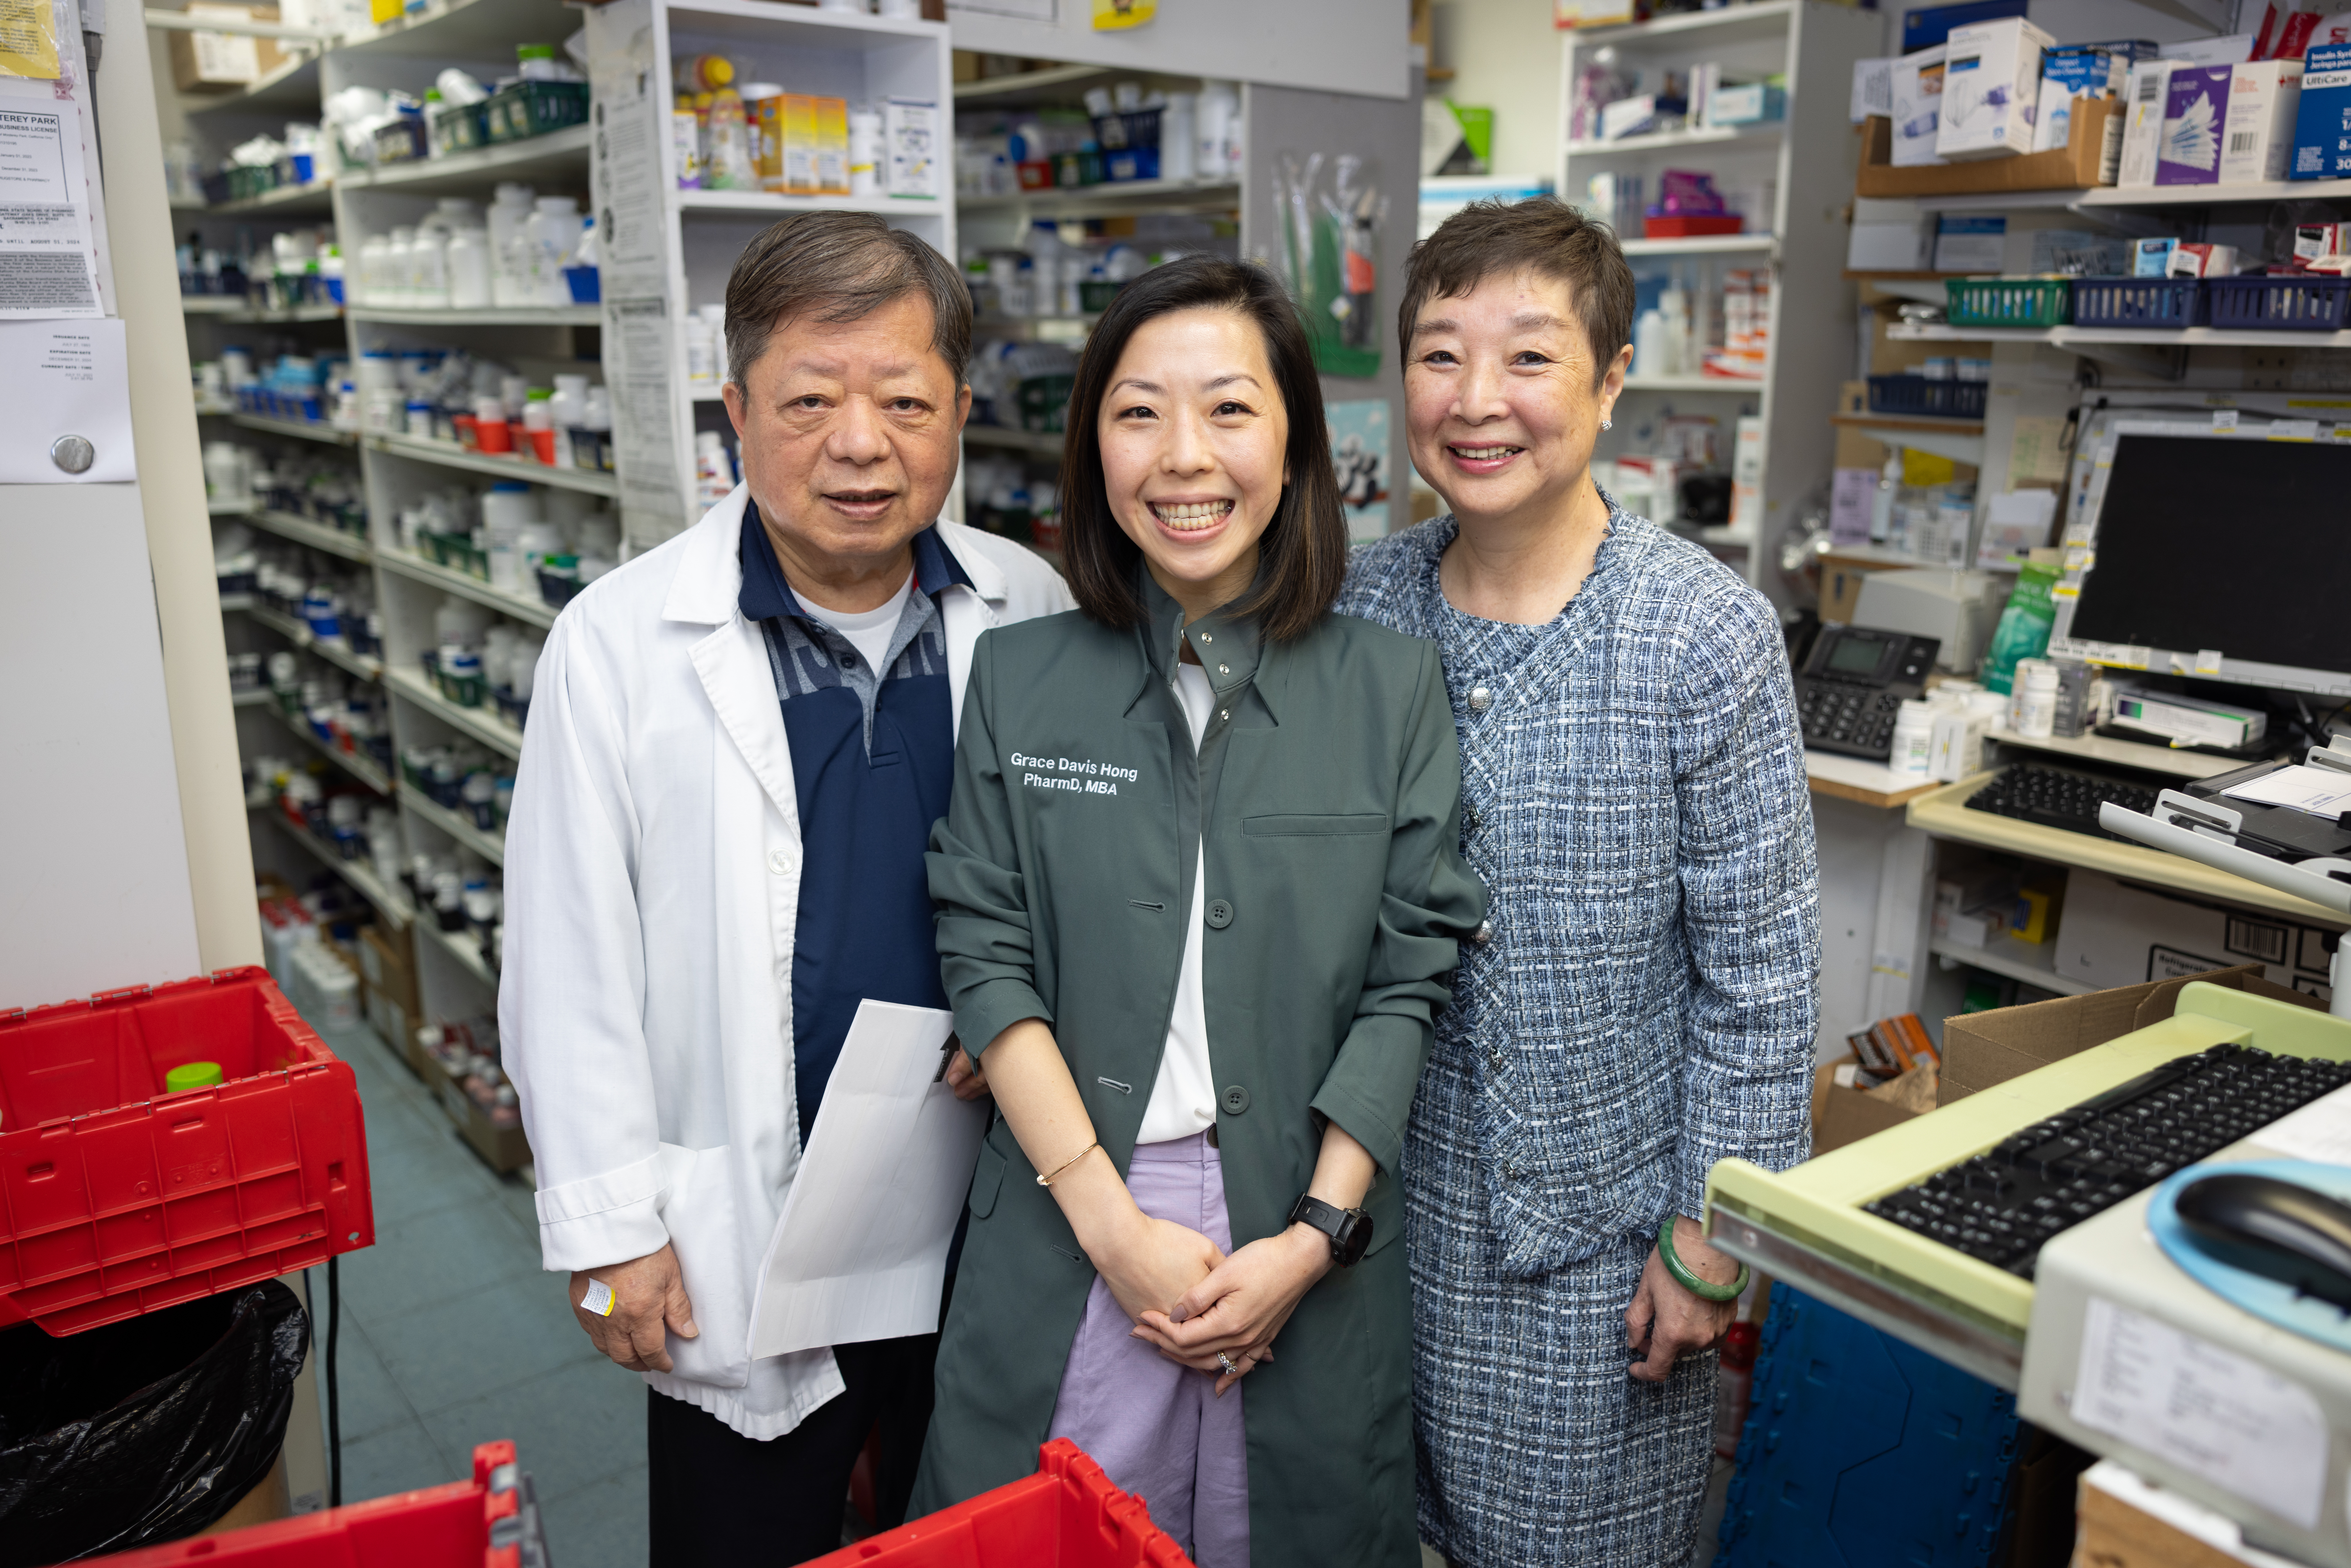 Dr. Grace Hong and her parents at their family owned pharmacy